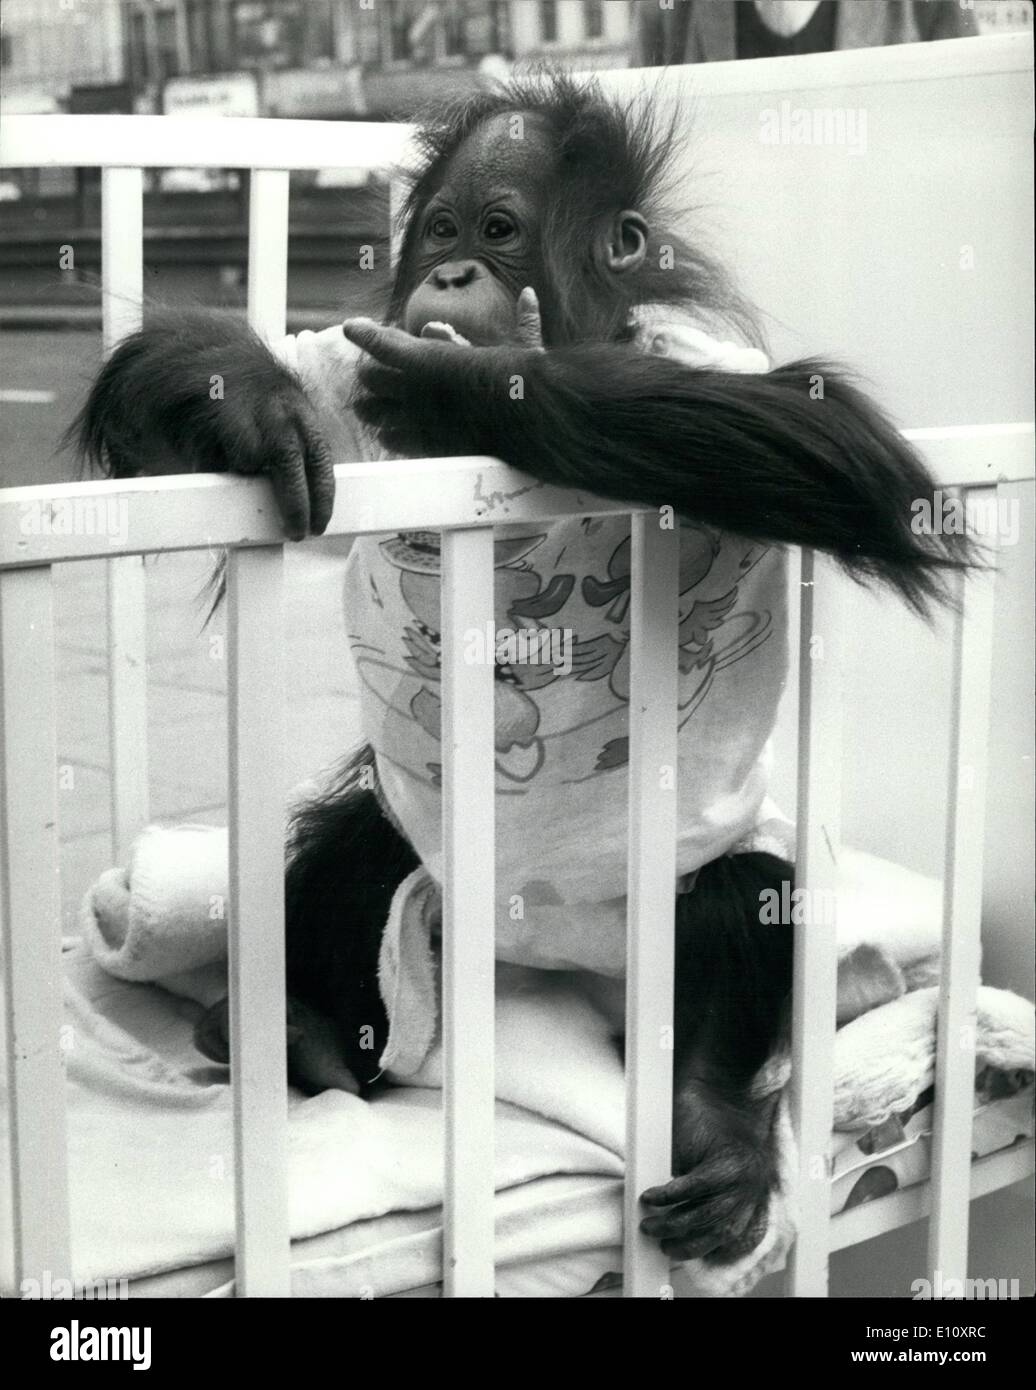 Aug. 08, 1974 - TALKING ORANG-UTAN FOR TV PROGRAMME. A talking orang-utan called Cody is the star of Thames Television's TODAY programme tonight. He will be interviewed by John Stapleton. Cody, a 13 months old, was ''adopted' by Ph. D reseach student Keith Laidler six weeks after birth. Since then he has been trated as a human baby, sleeping in a cot in a nursery, given toys and a climbing frame to play with, and is being taught to 'speak' - his vocabulary now totals two half-words. Cody is now about 18 inches tall and will grow to an eventual 4ft 6ins Stock Photo